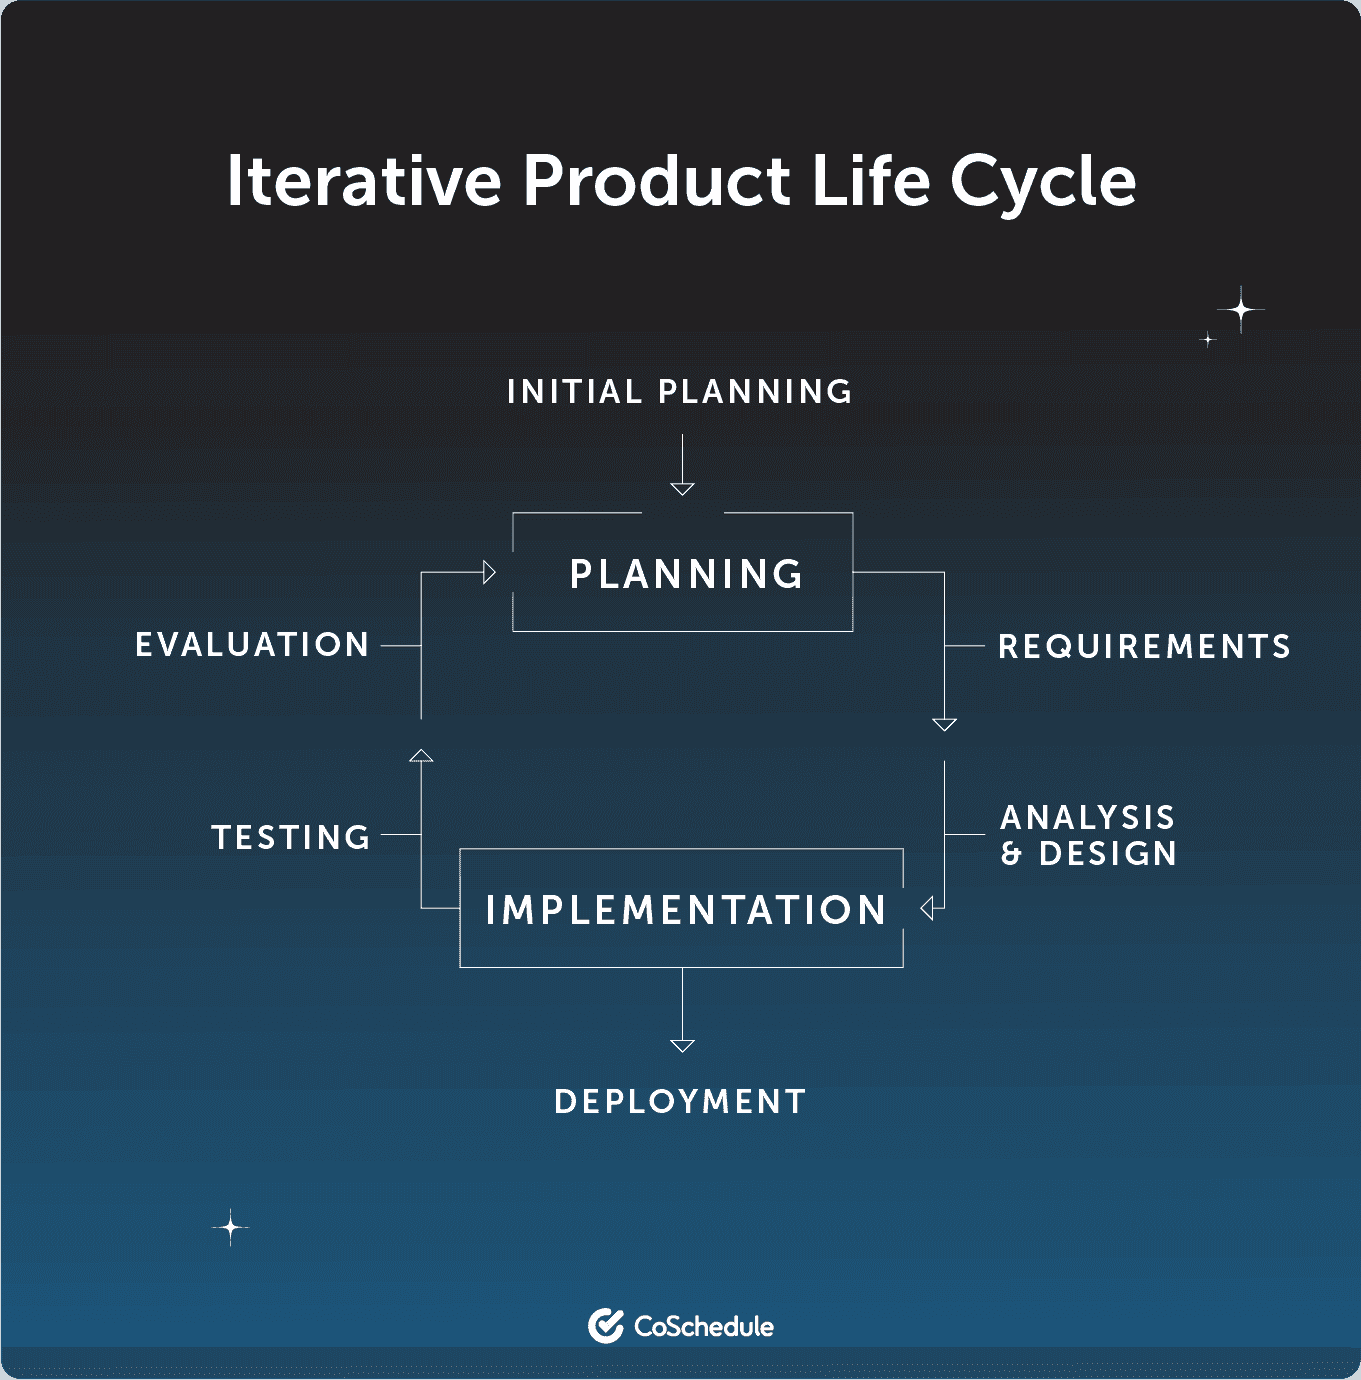 illustration of a predictive product life cycle: 1. initial planning > planning > requirements > analysis & design > implementation > testing > evaluation > loops back through planning, requirements, analysis & design, implementation and finally goes to deployment. This demonstrates that the process might be repeated multiple times.